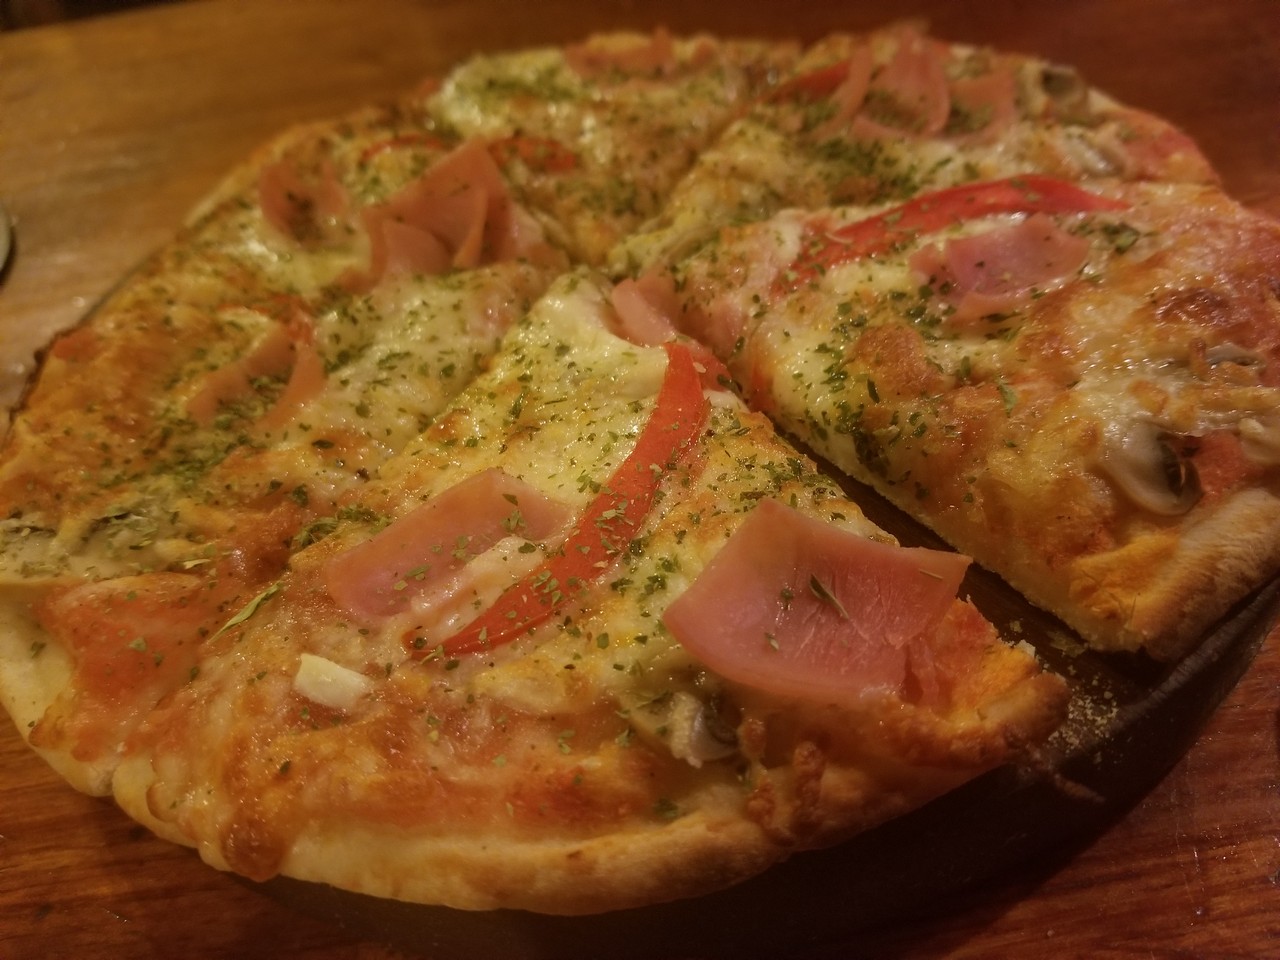 a pizza with ham and tomatoes on a wooden surface